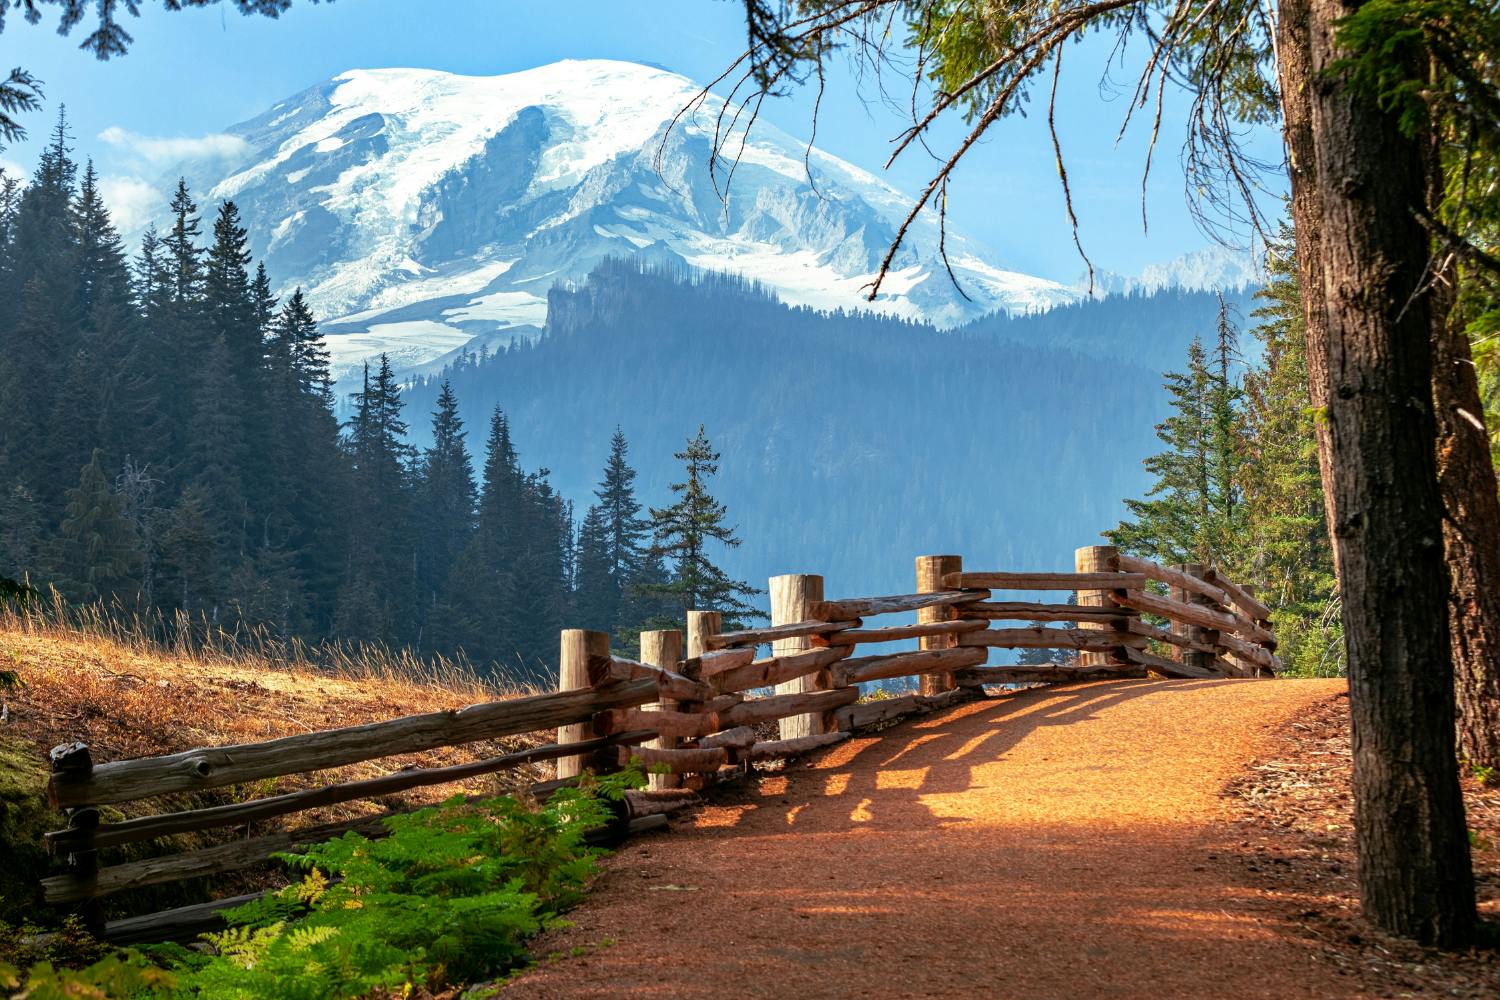 The Mount Rainier Majestic Trails Self-Guided Audio Driving Tour